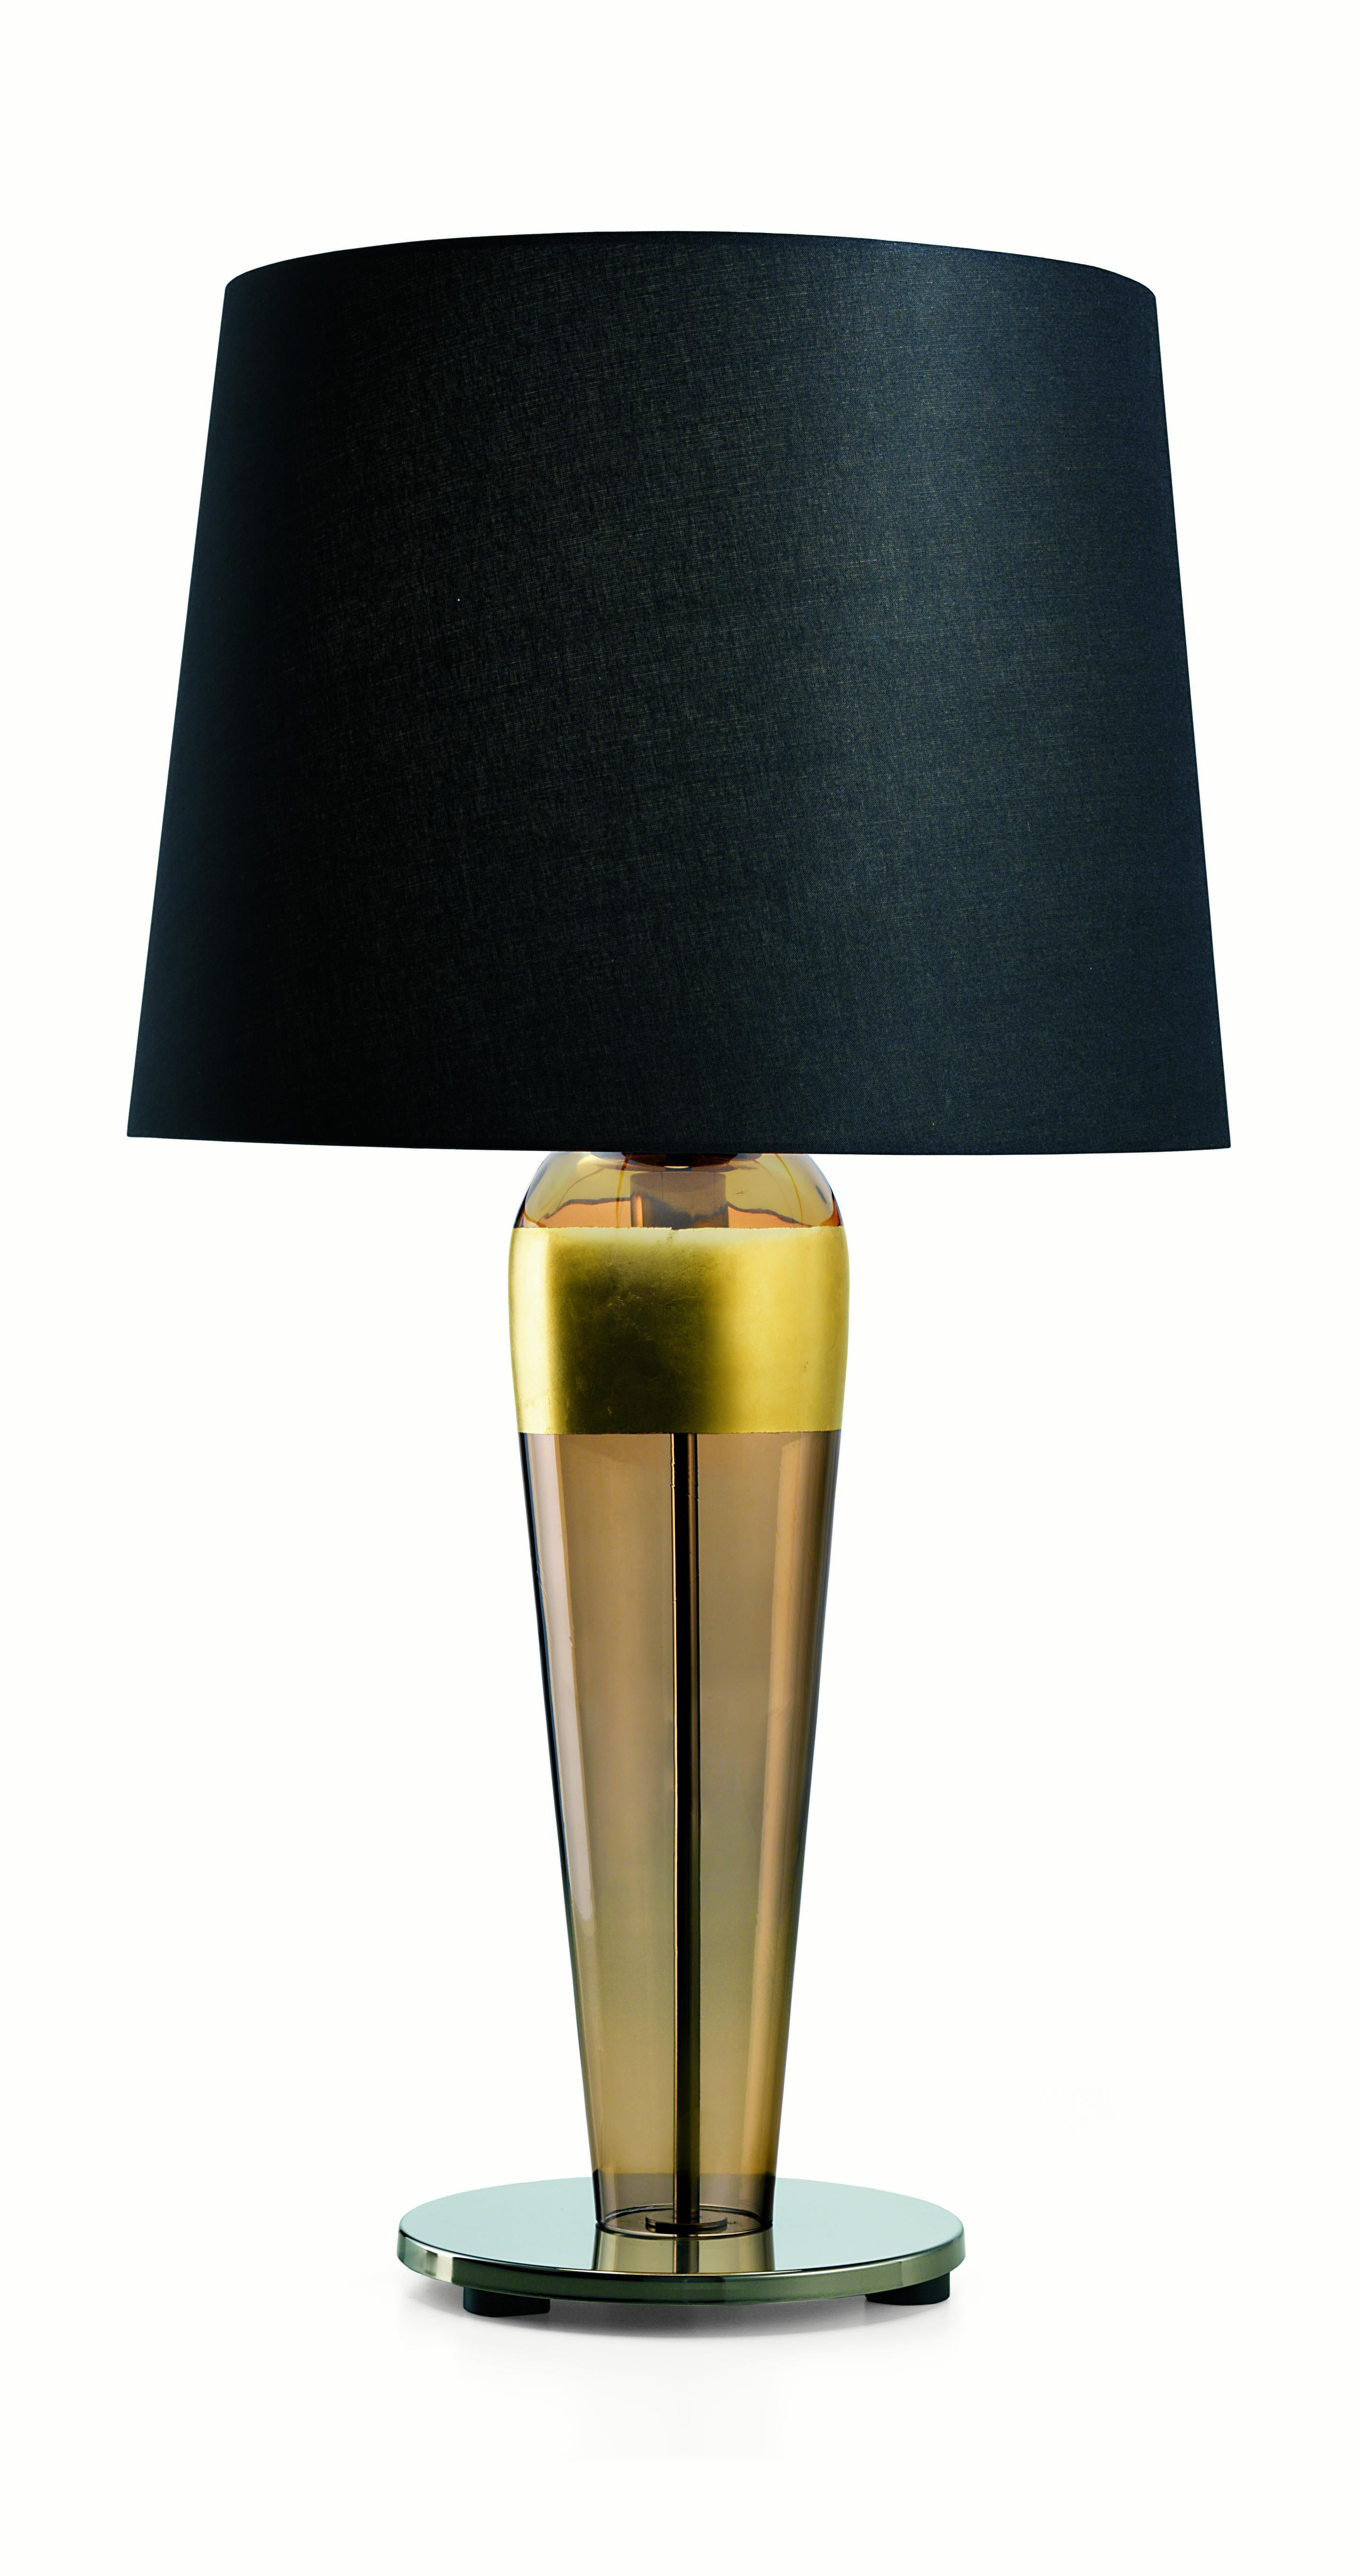 Brown (Brown_BW) Sara 5574 Table Lamp in Glass with Black Shade, by Barovier&Toso 4